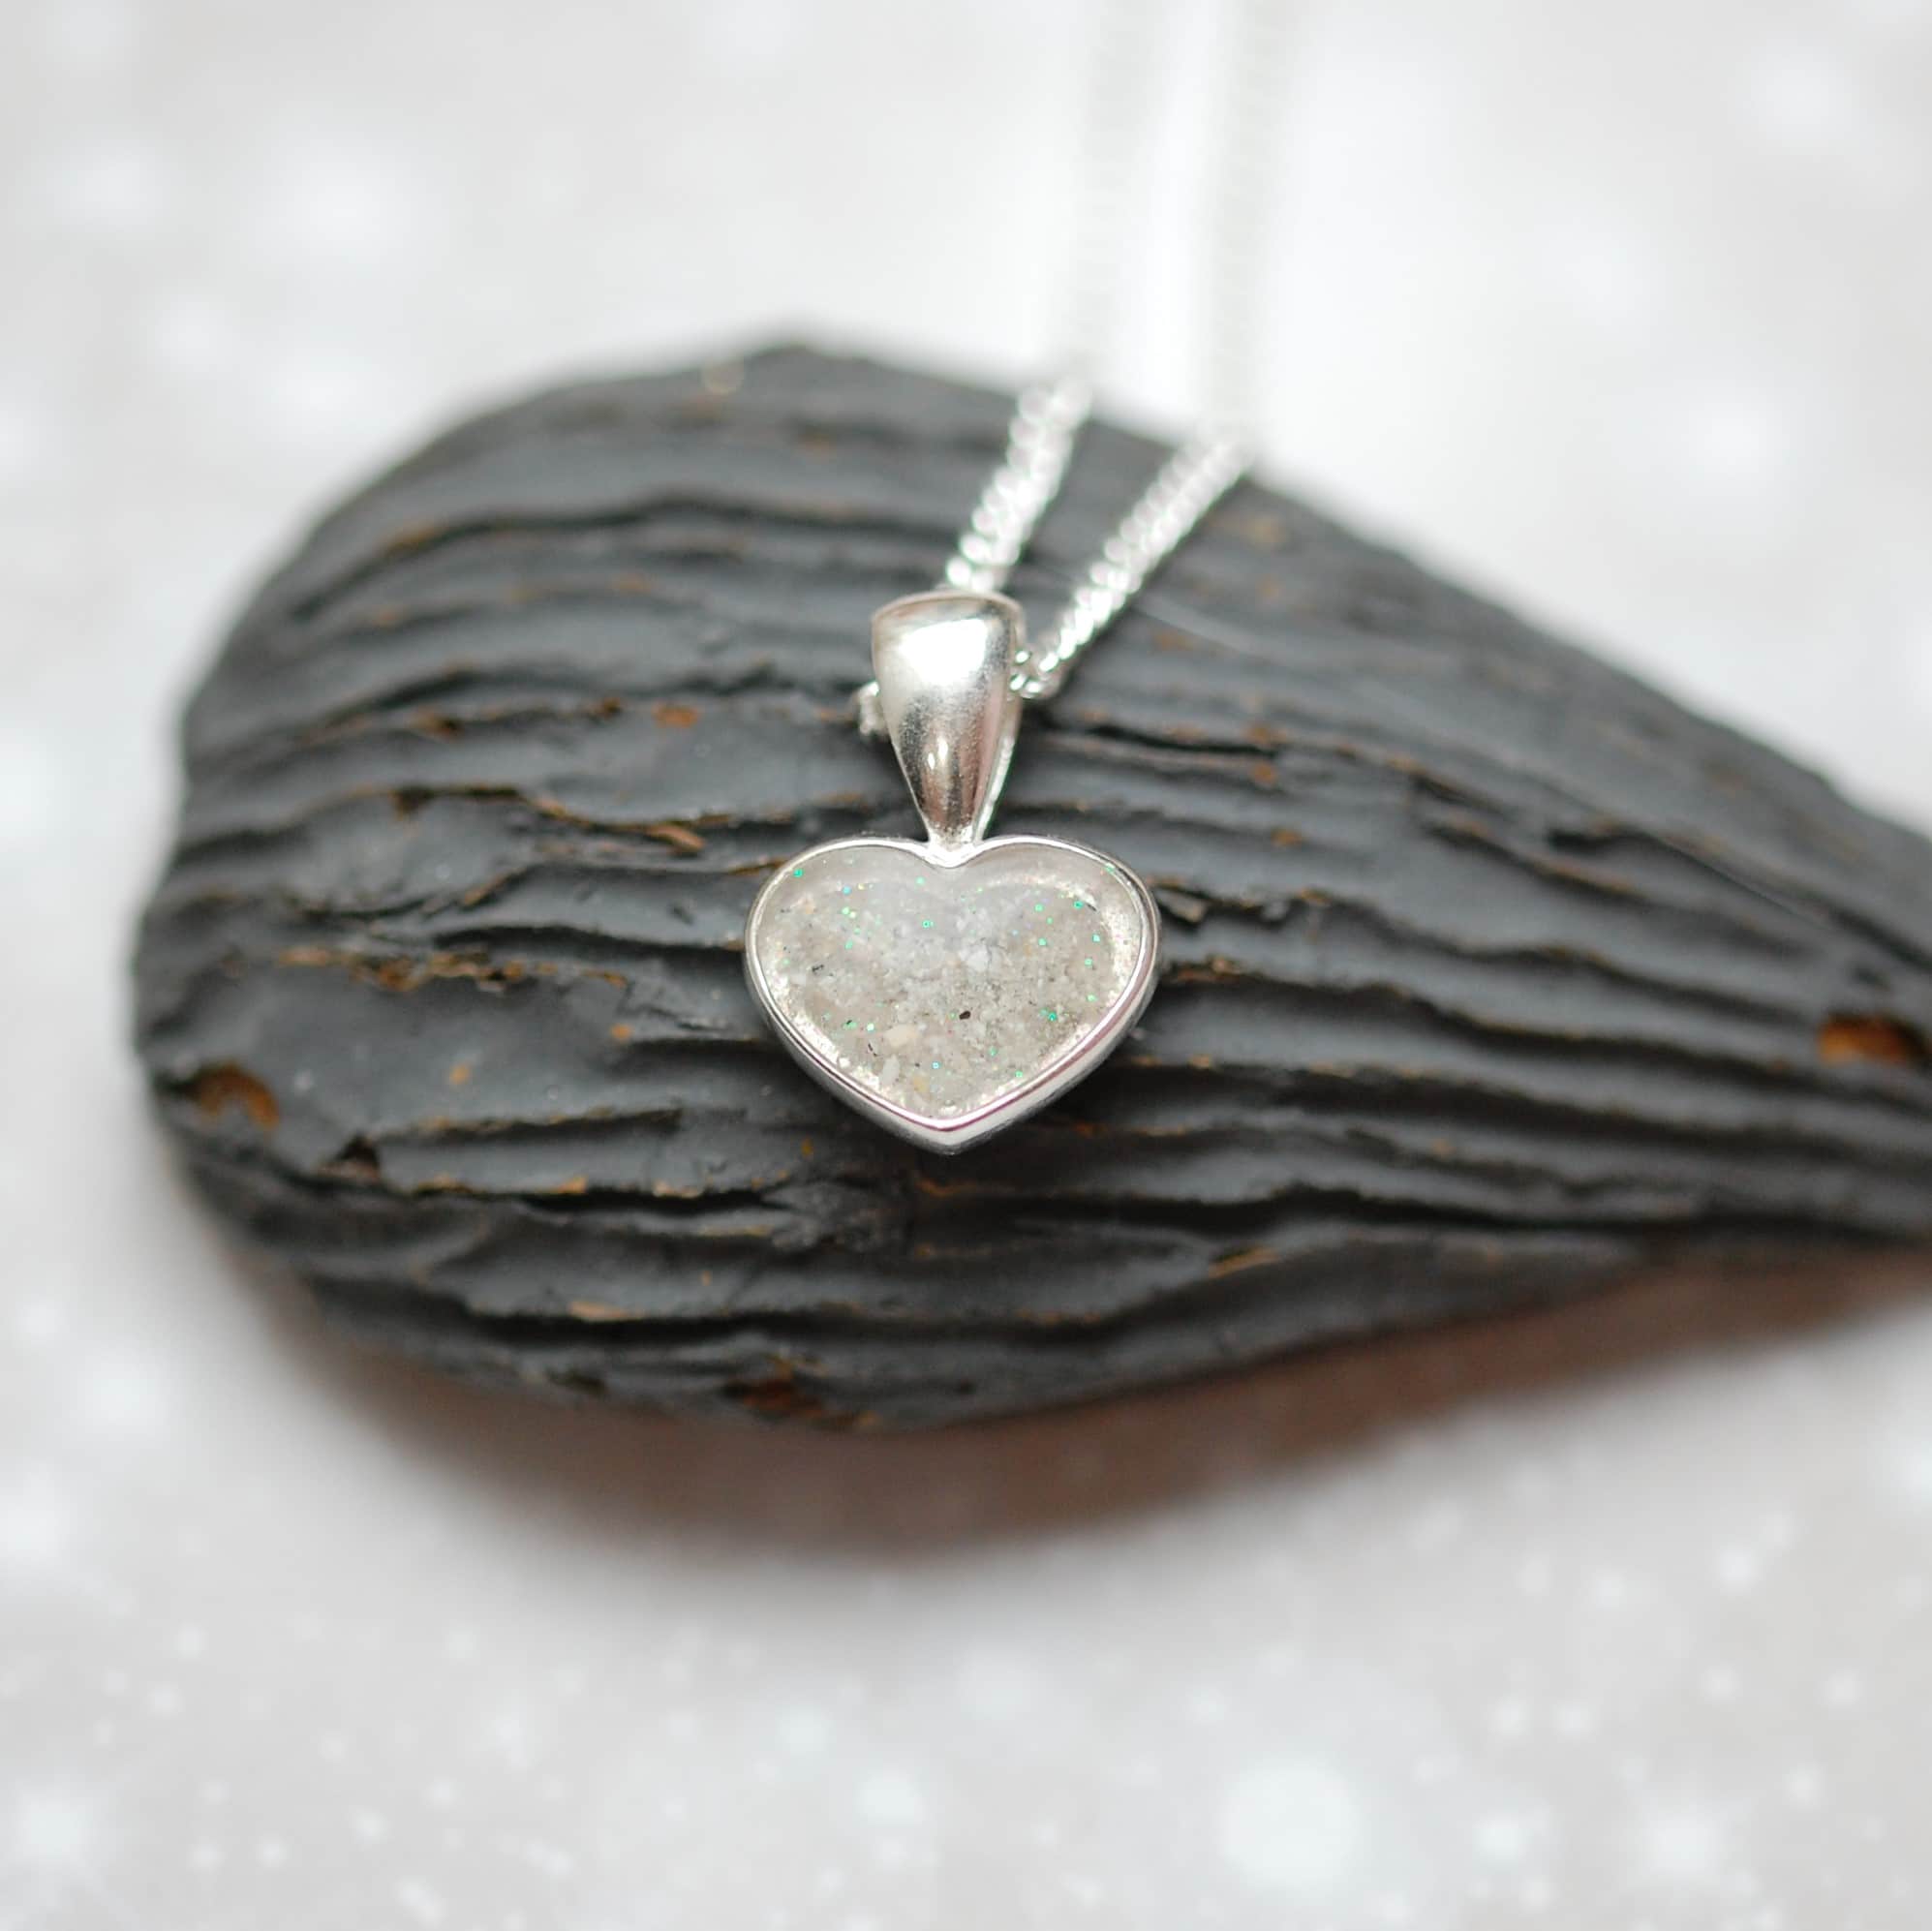 Small heart pendant with pet fur or cremation ashes